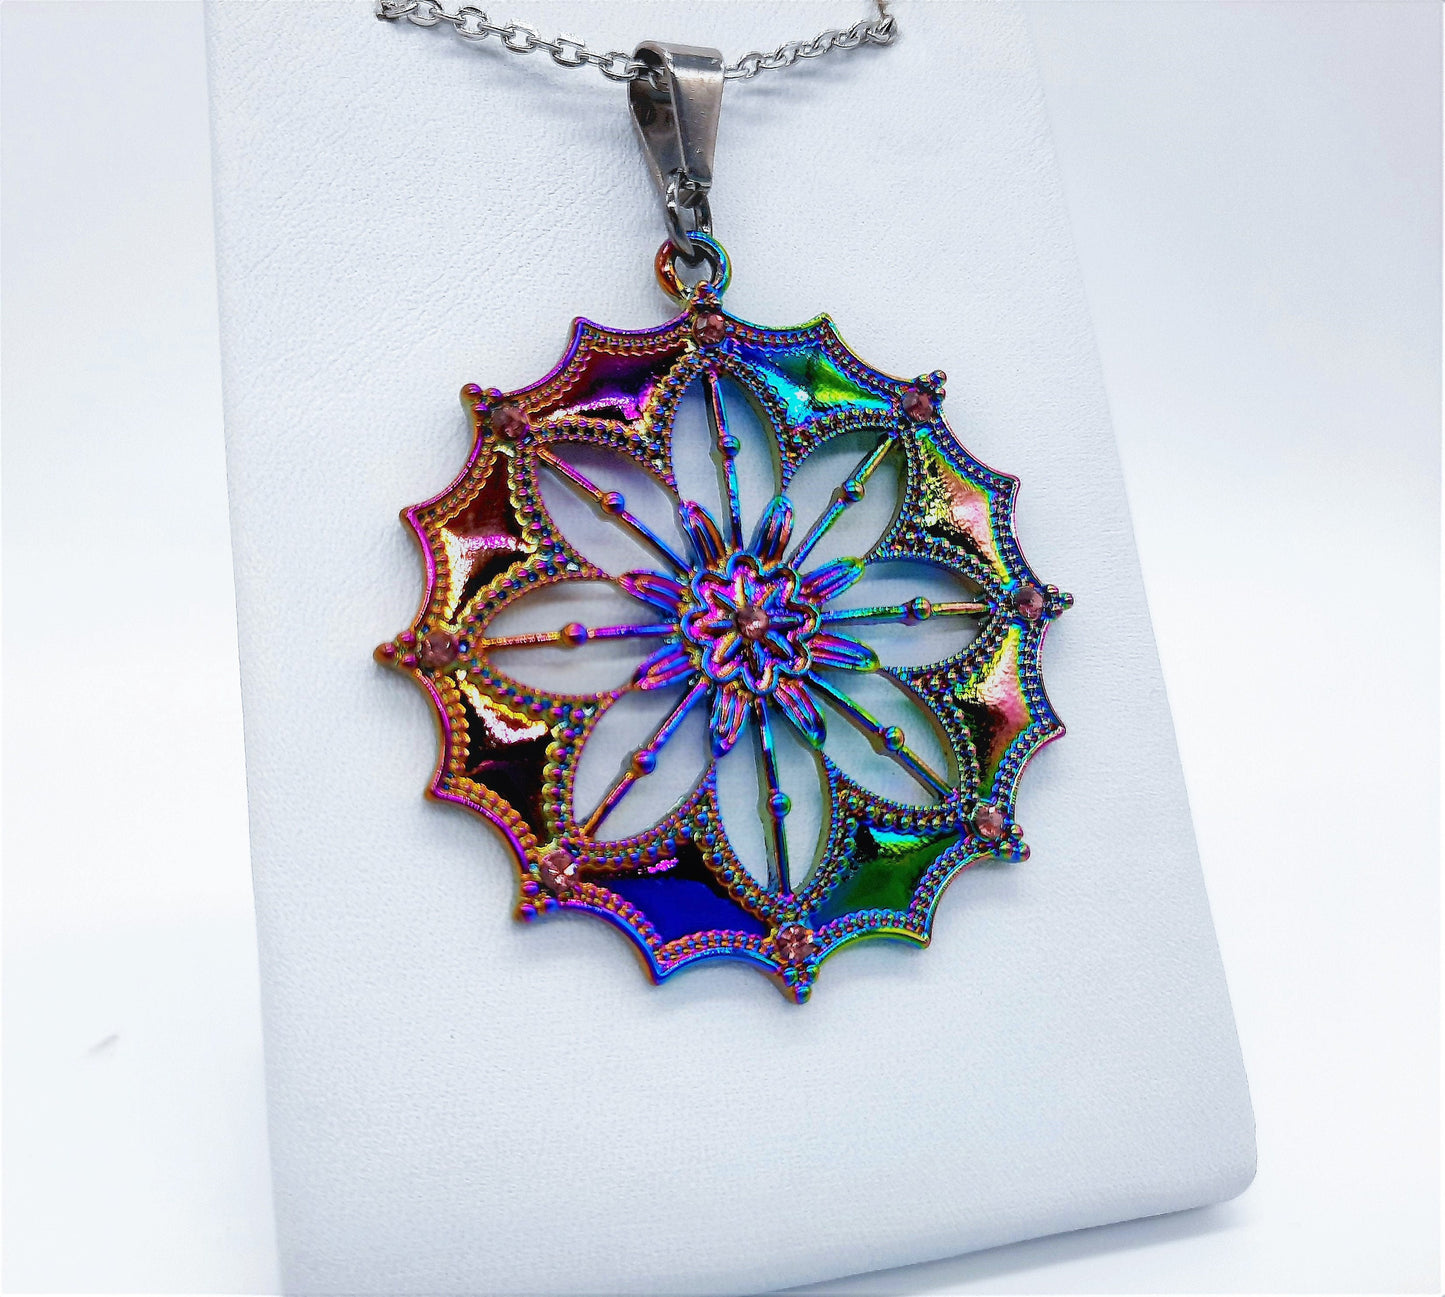 Rainbow Chromium Mandala Pendant Necklace - Tibetan Style - Filigree Flower Pattern - Comes with 18" Stainless Steel Chain - Hypoallergenic